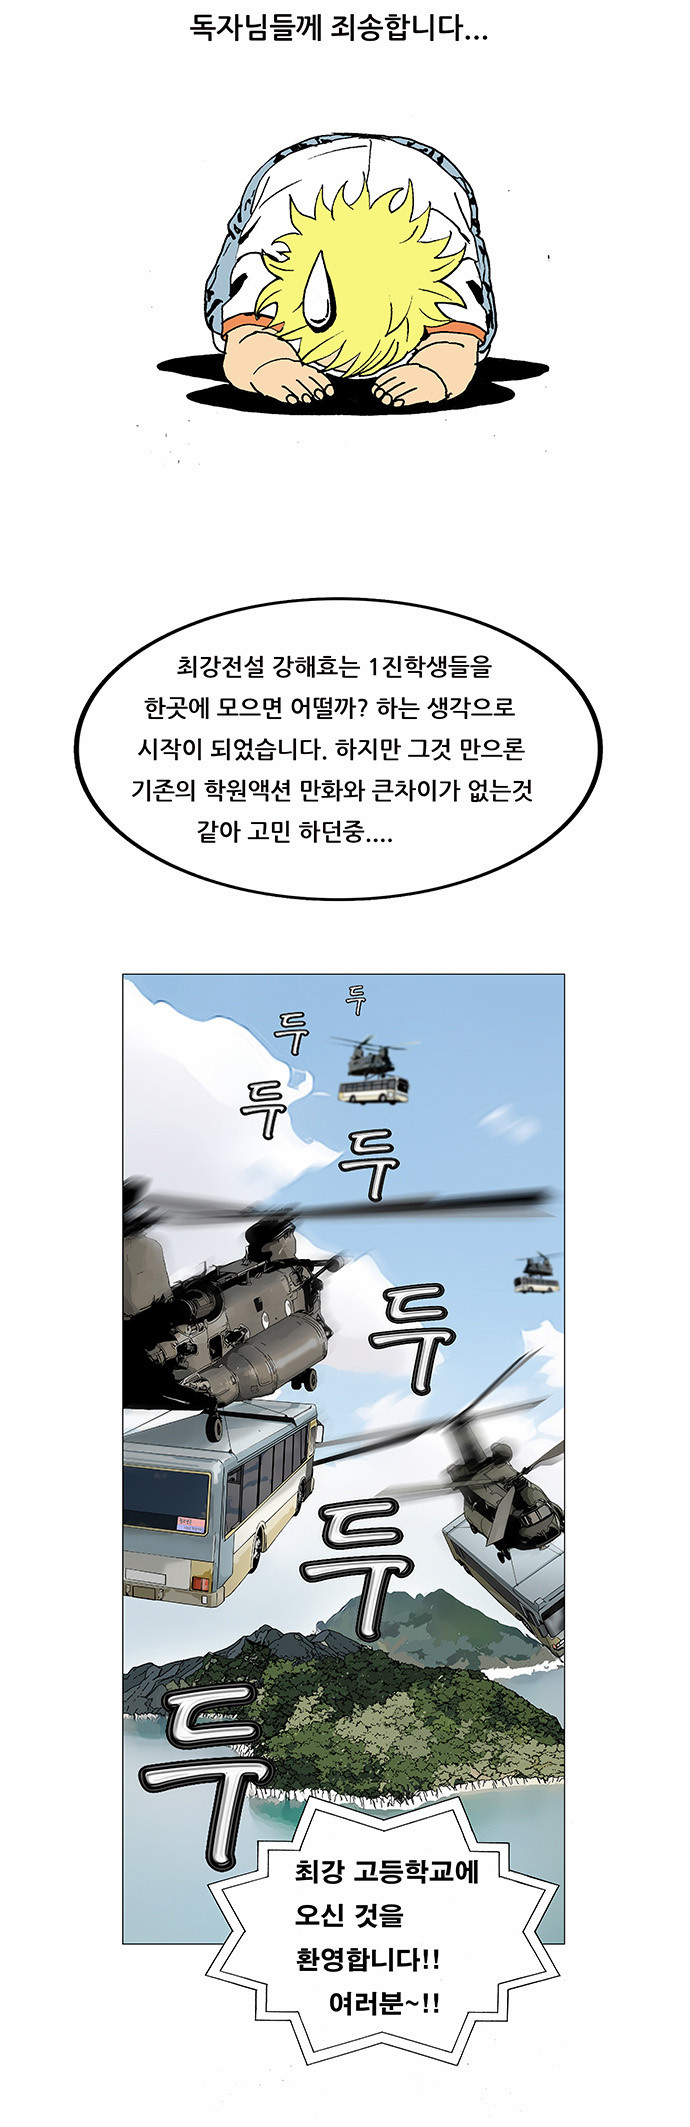 Ultimate Legend - Kang Hae Hyo - Chapter 92 - Page 2